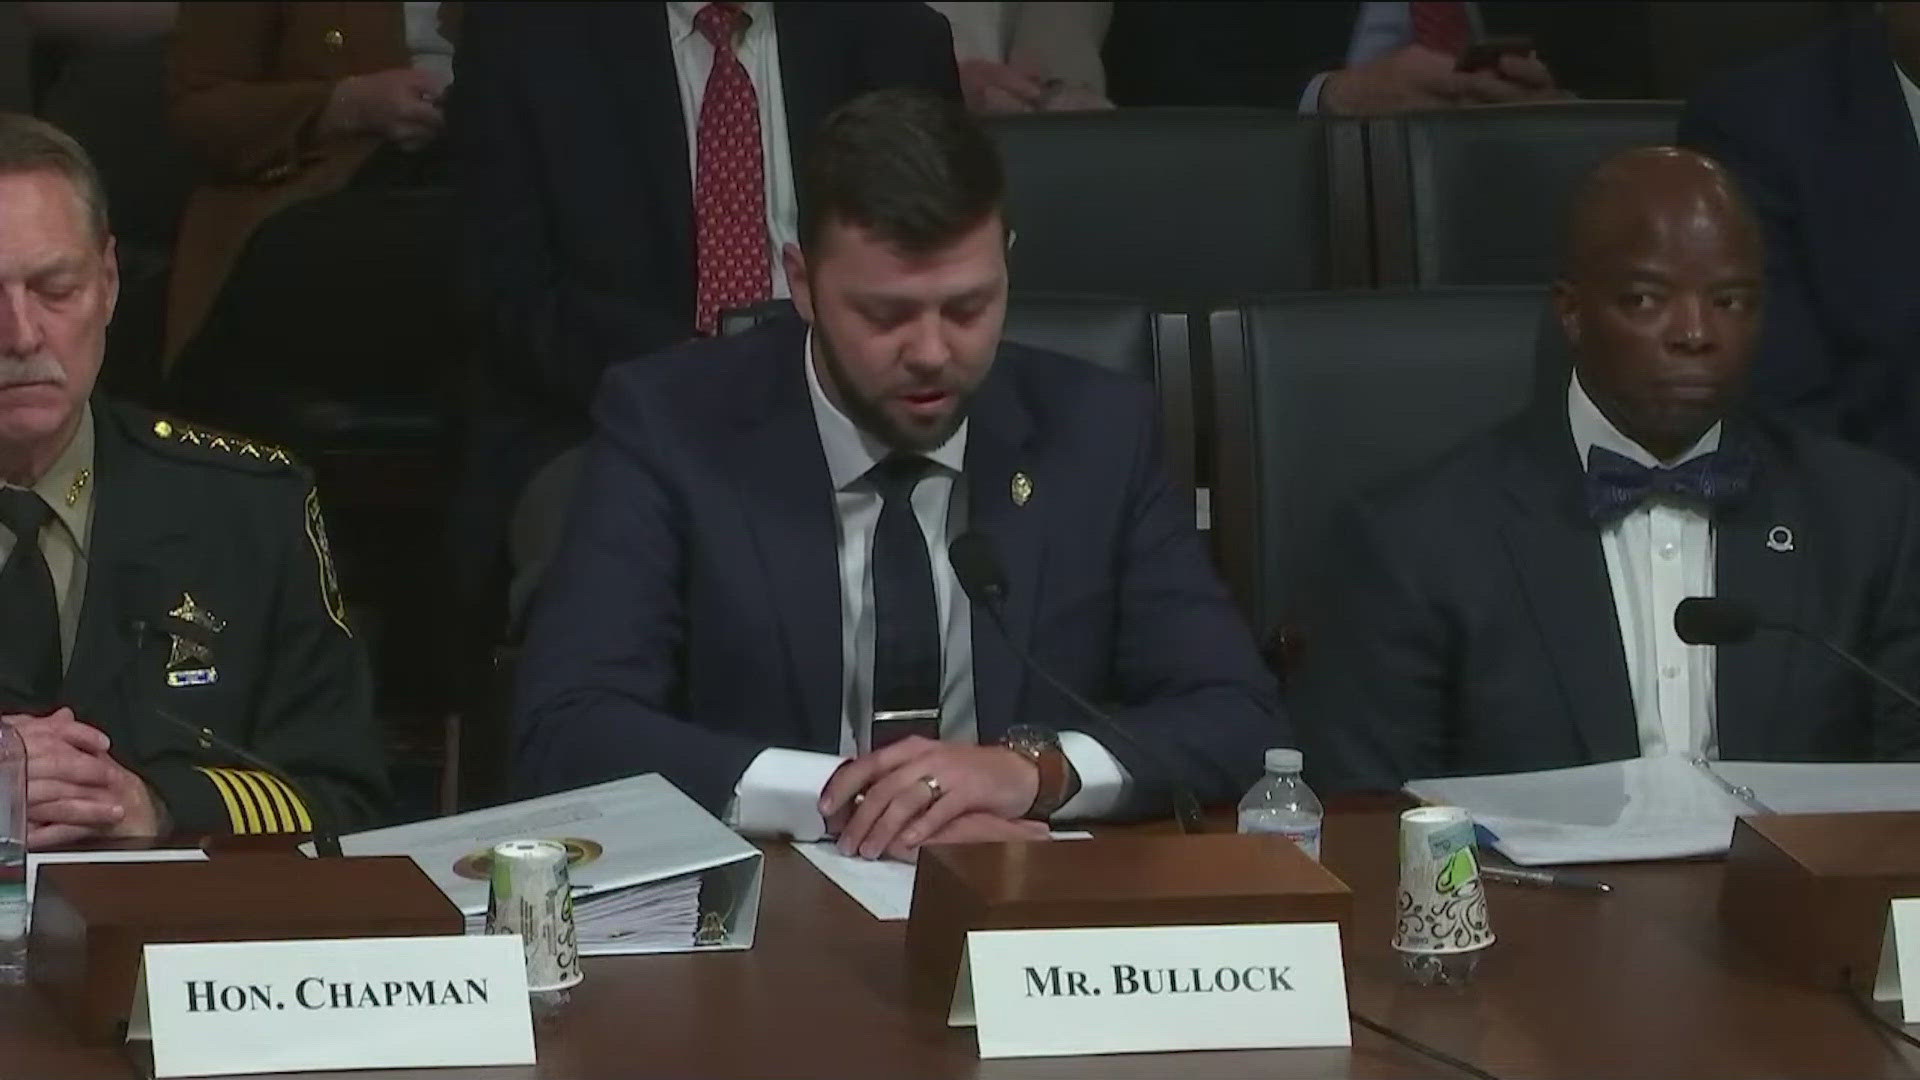 Michael Bullock testified to Congress that the Austin Police Department is still woefully understaffed, despite it's status as one of the nation's largest cities.